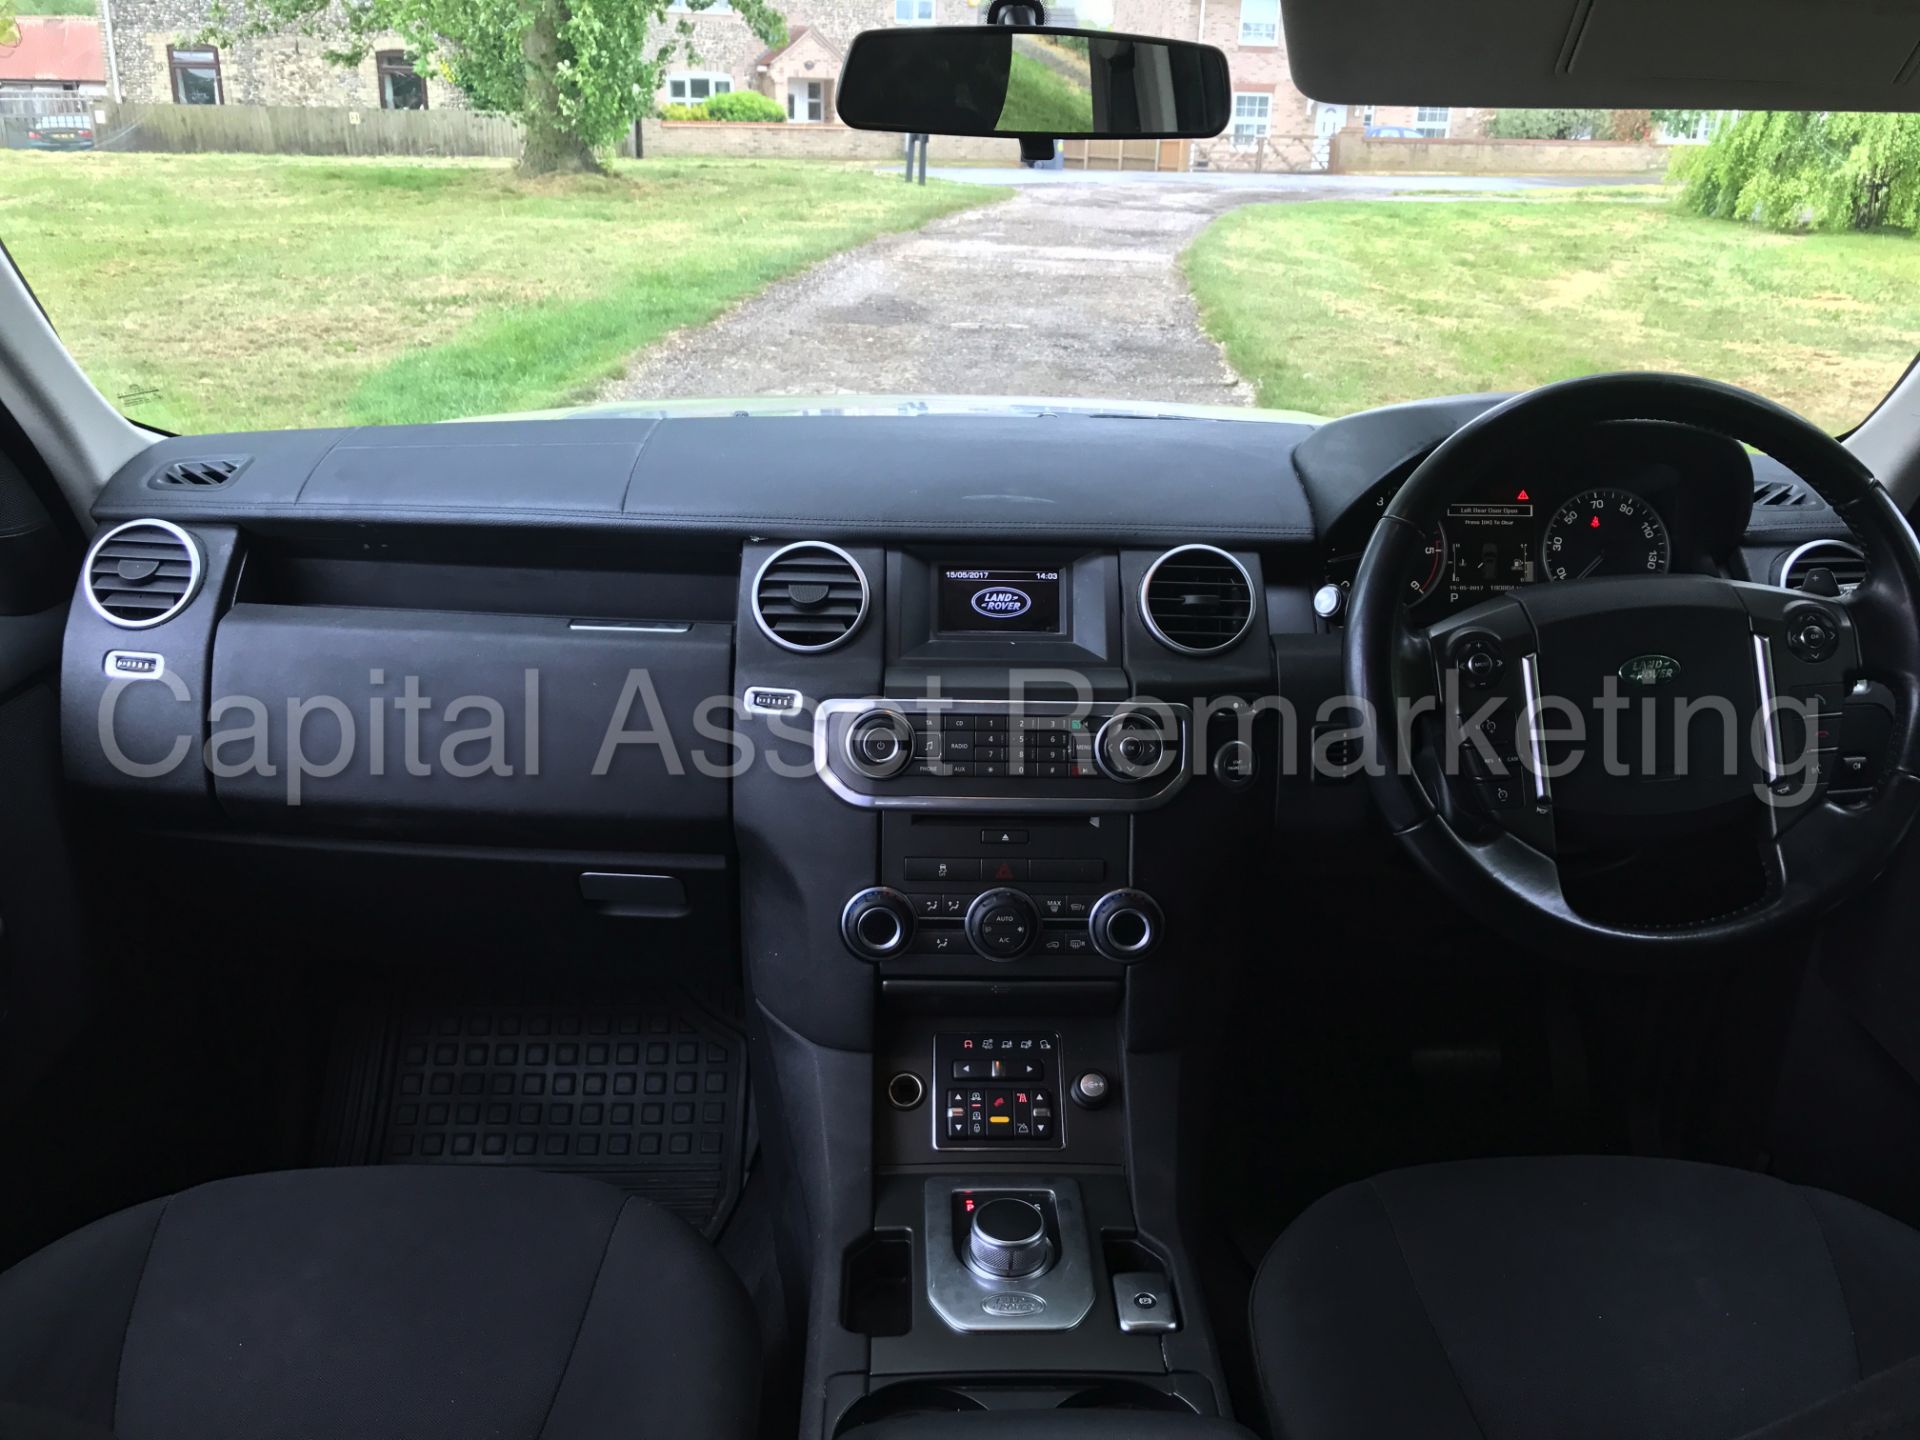 (On sale) LAND ROVER DISCOVERY 4 (2014 MODEL) '3.0 SDV6 -AUTO- 255 BHP - 7 SEATER'(1 OWNER FROM NEW) - Image 28 of 42